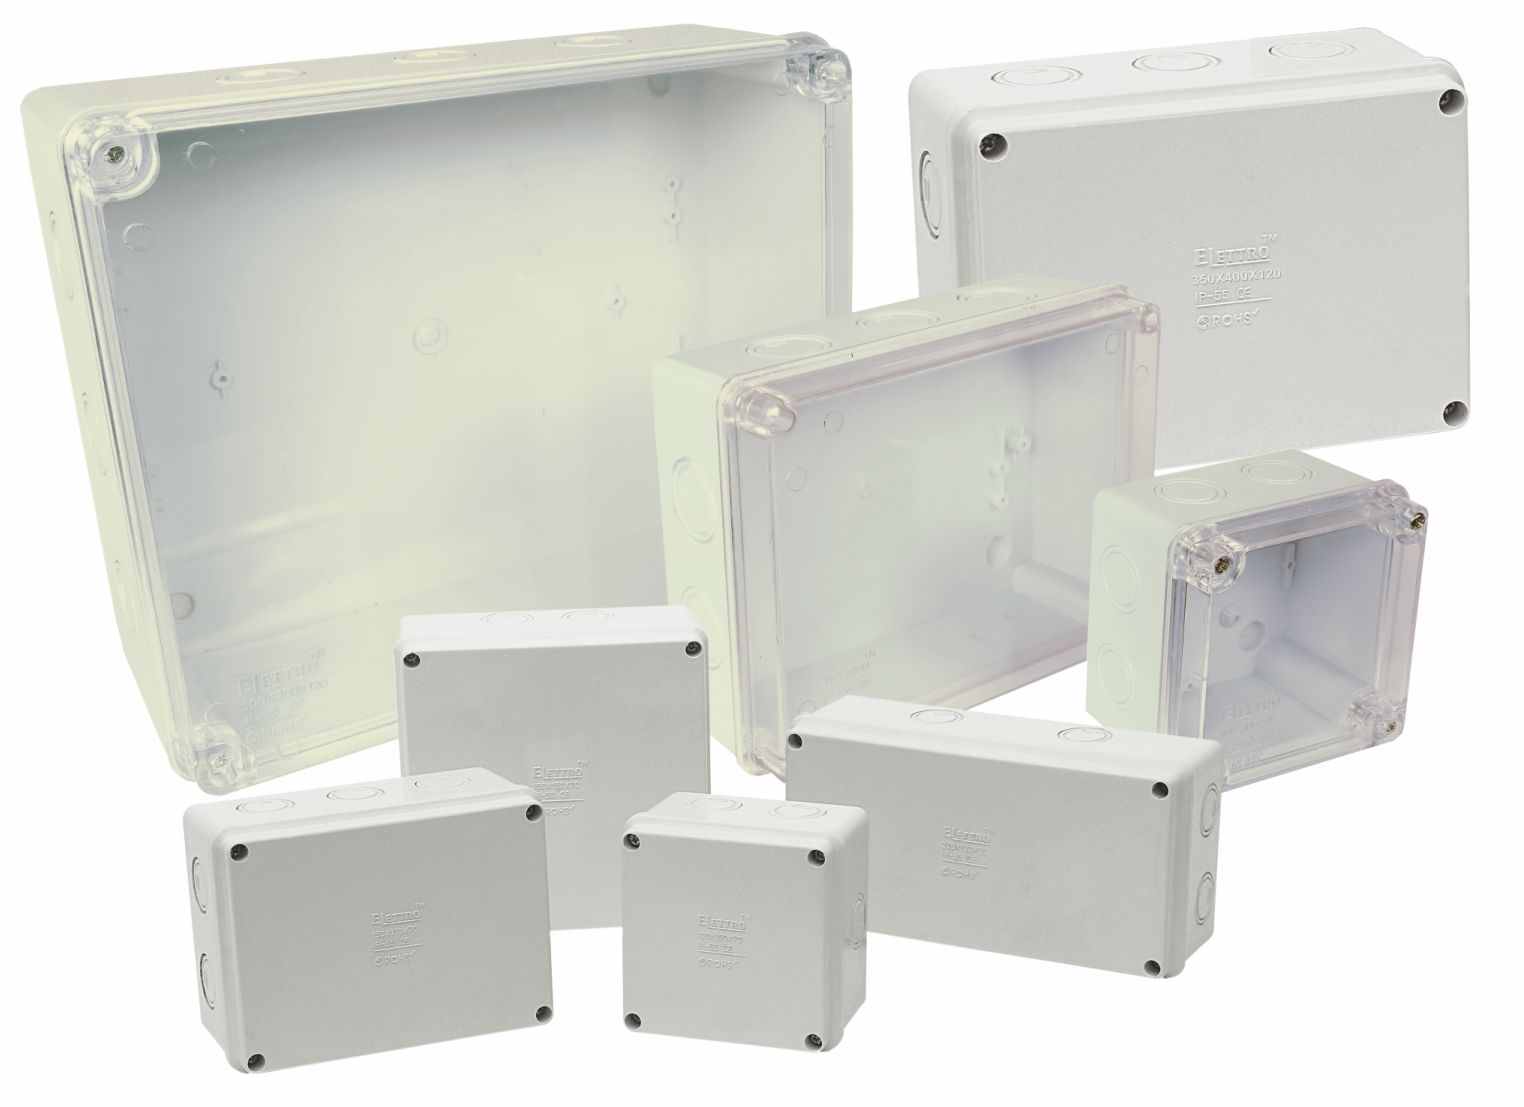 A.B.S JUNCTION BOX IP-55/65 - Elettro Electrical Cabinet Accessories